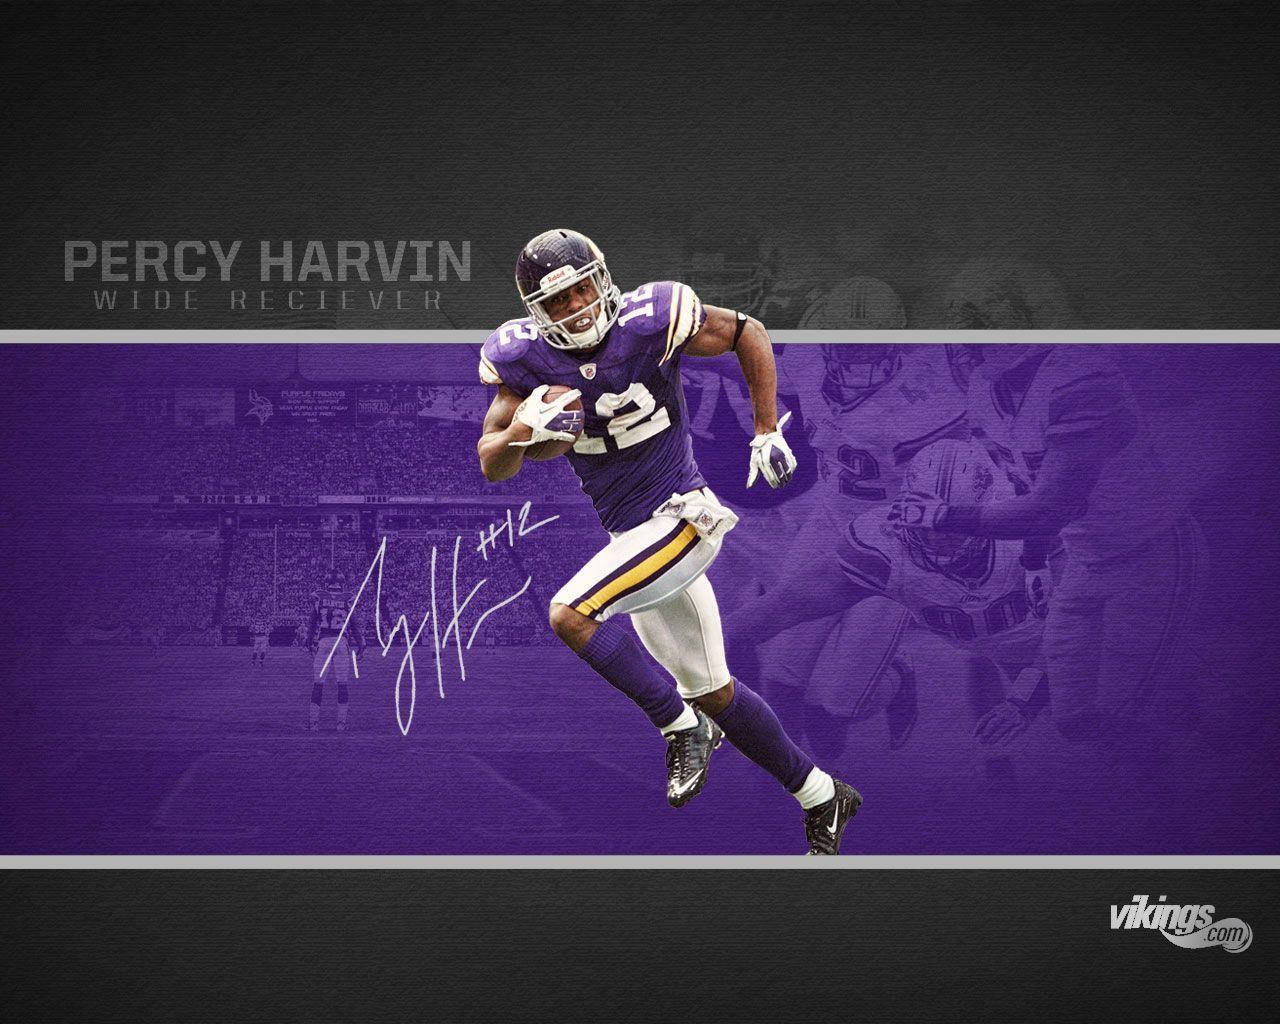 Nfl Football Player Percy Harvin Background